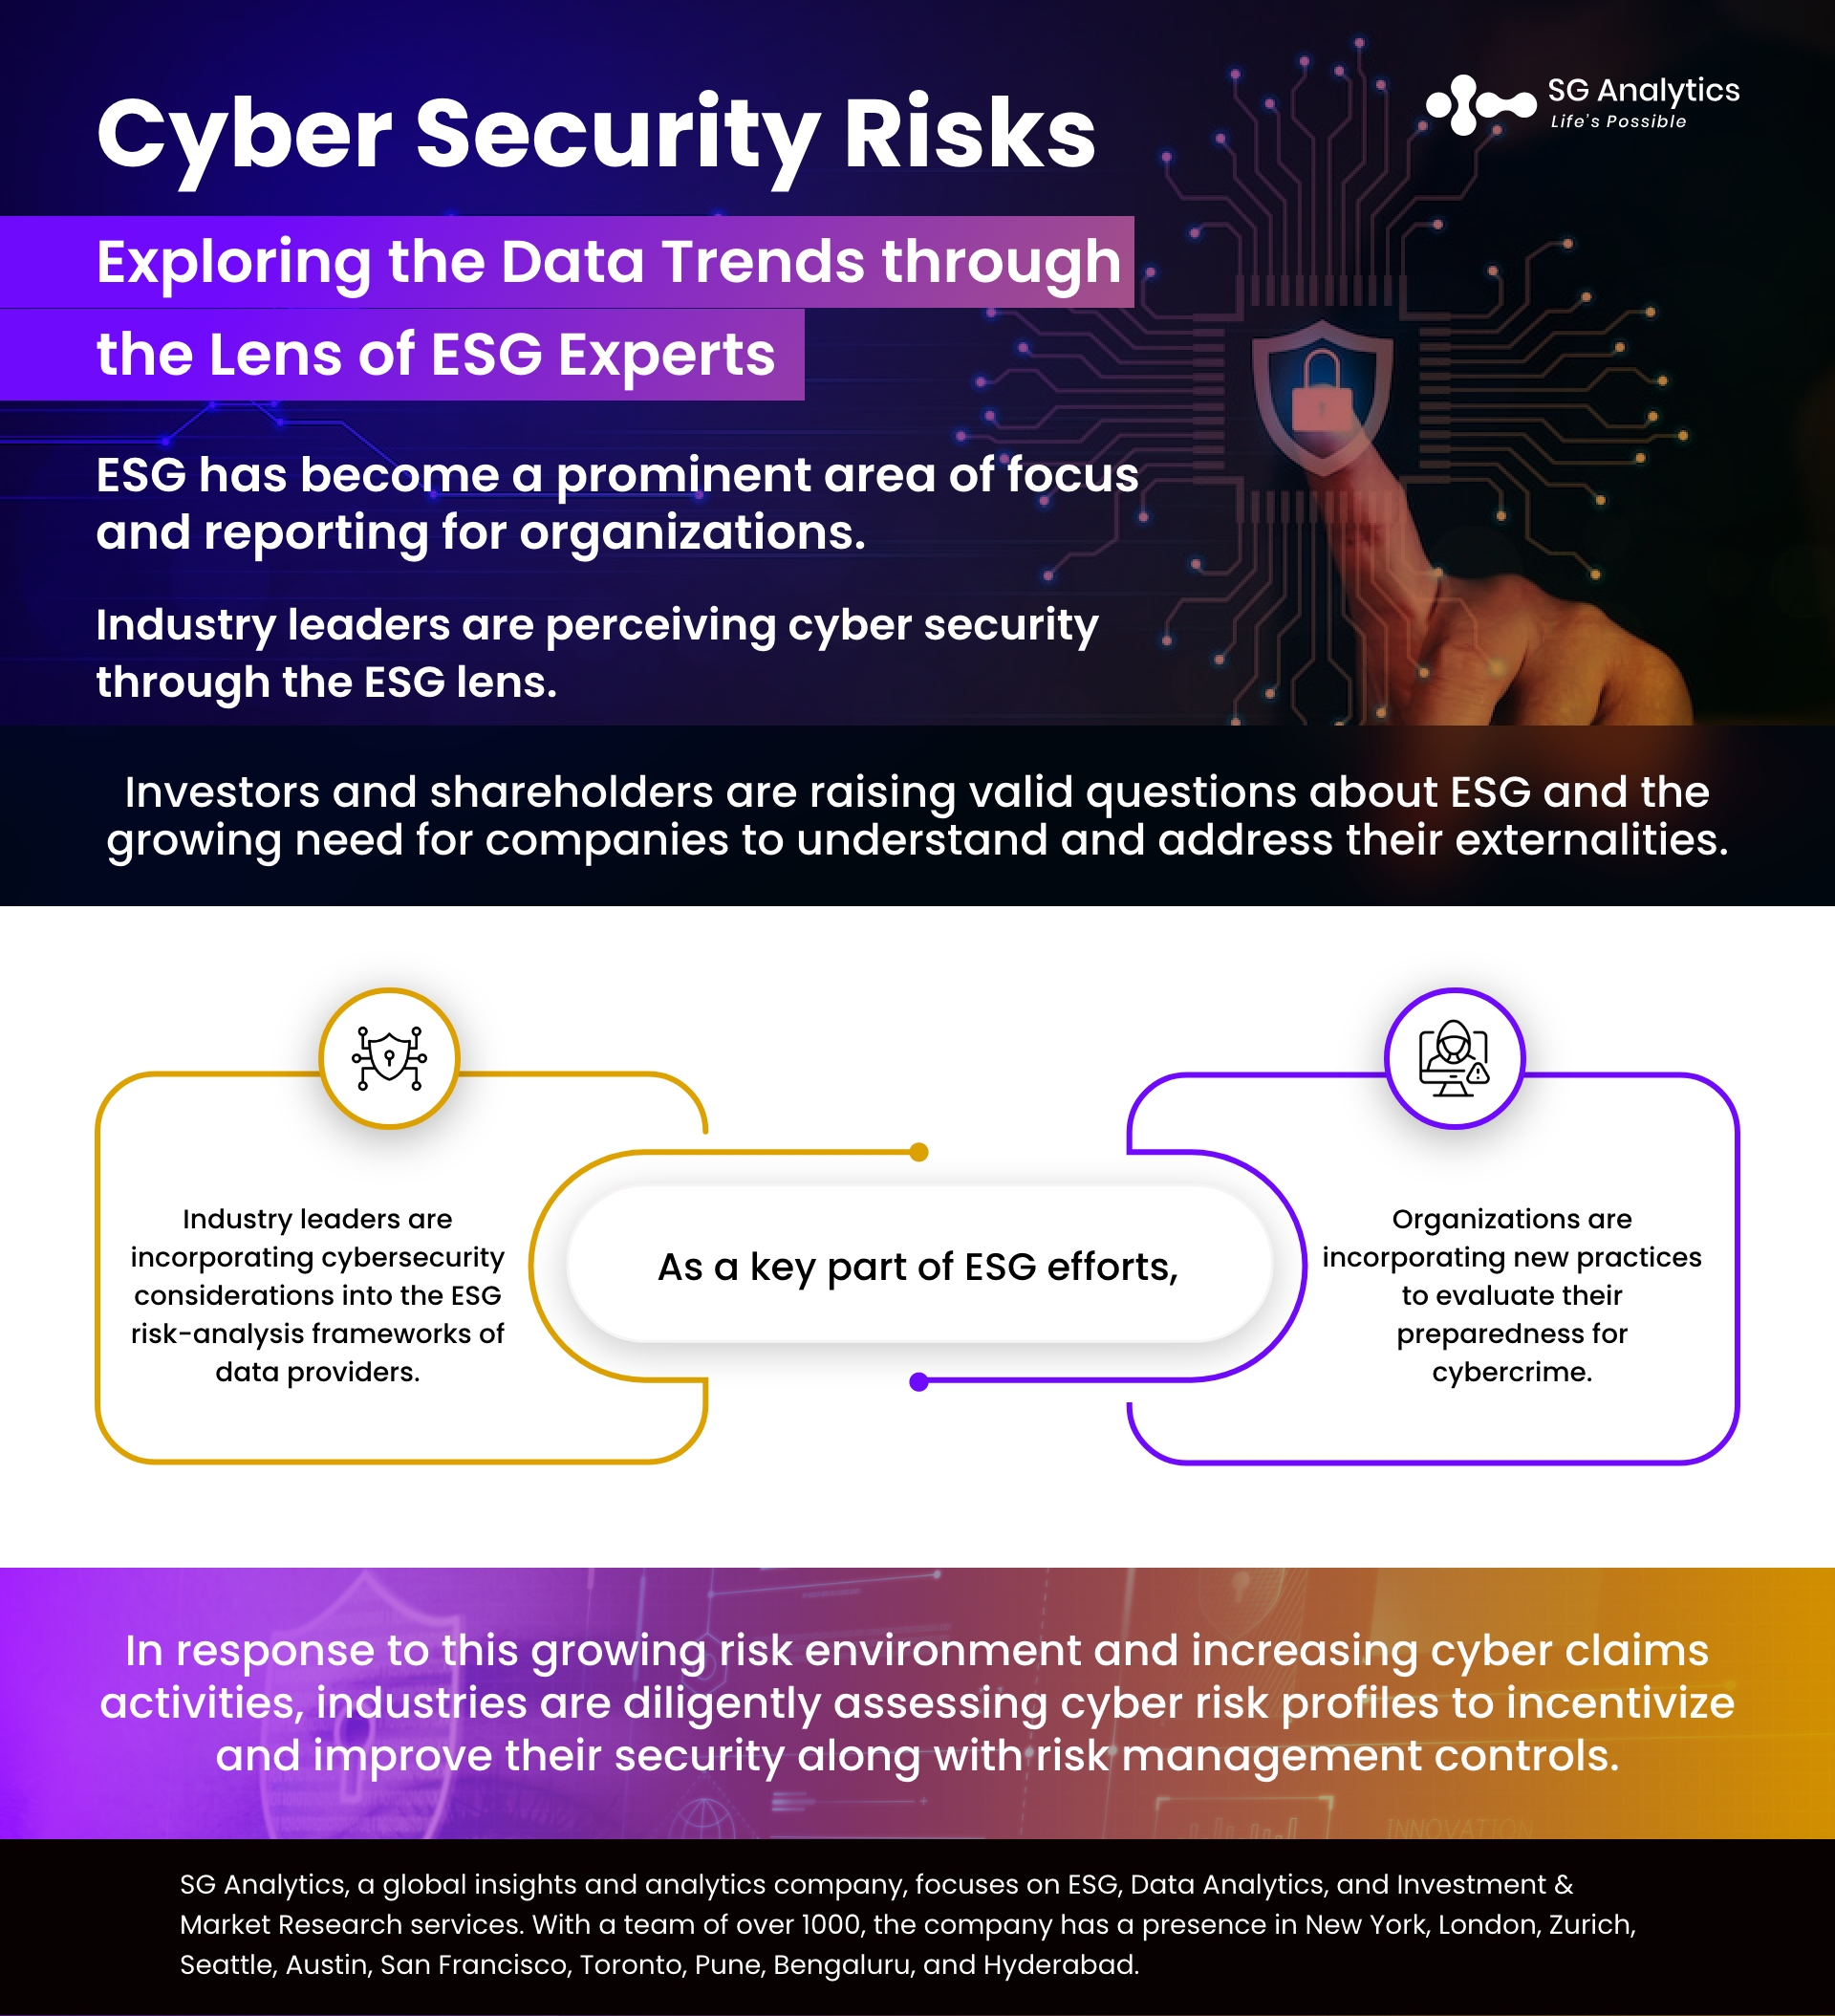 Cyber Security Risks - Exploring the Data Trends through the Lens of ESG Experts